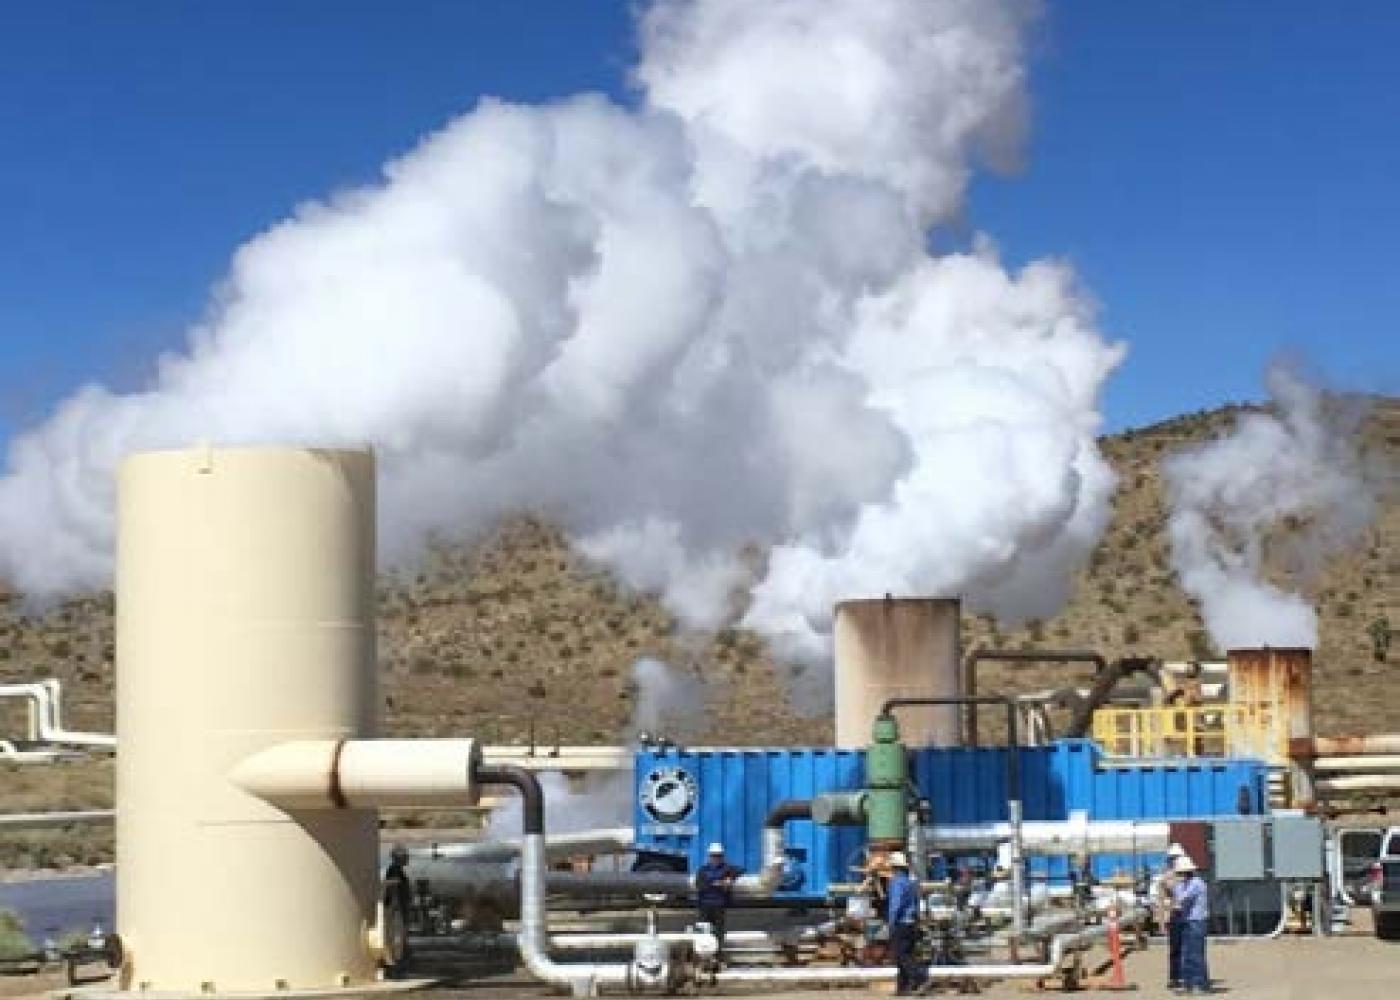 GreenFire Energy’s 2019 Demonstration Project at the Coso Geothermal Power Plant